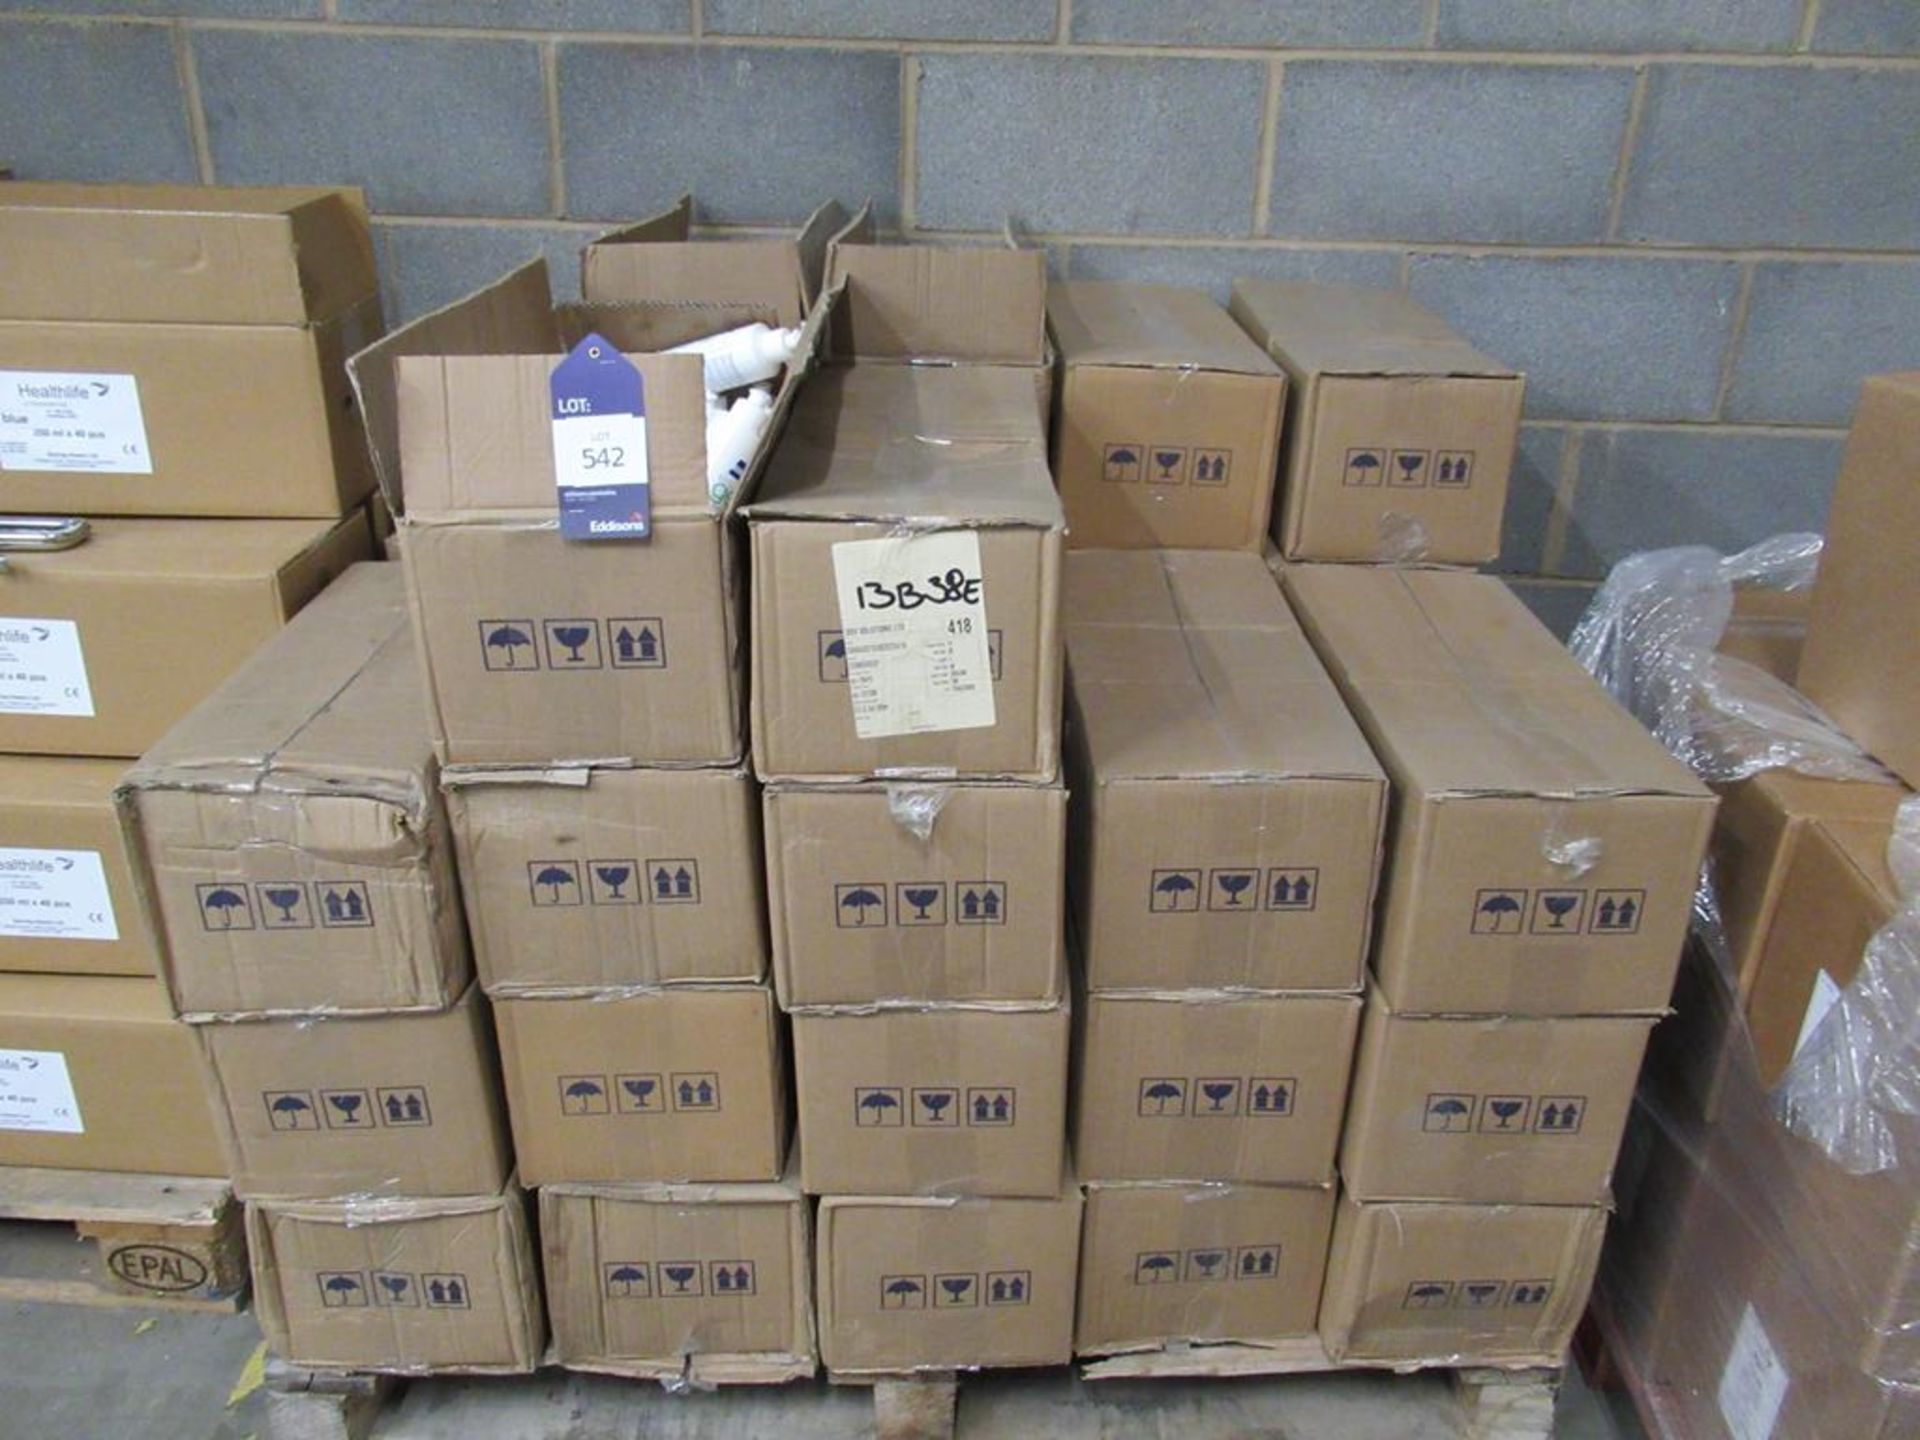 36 x boxes of ECG gel (250ml) - 3 boxes are open